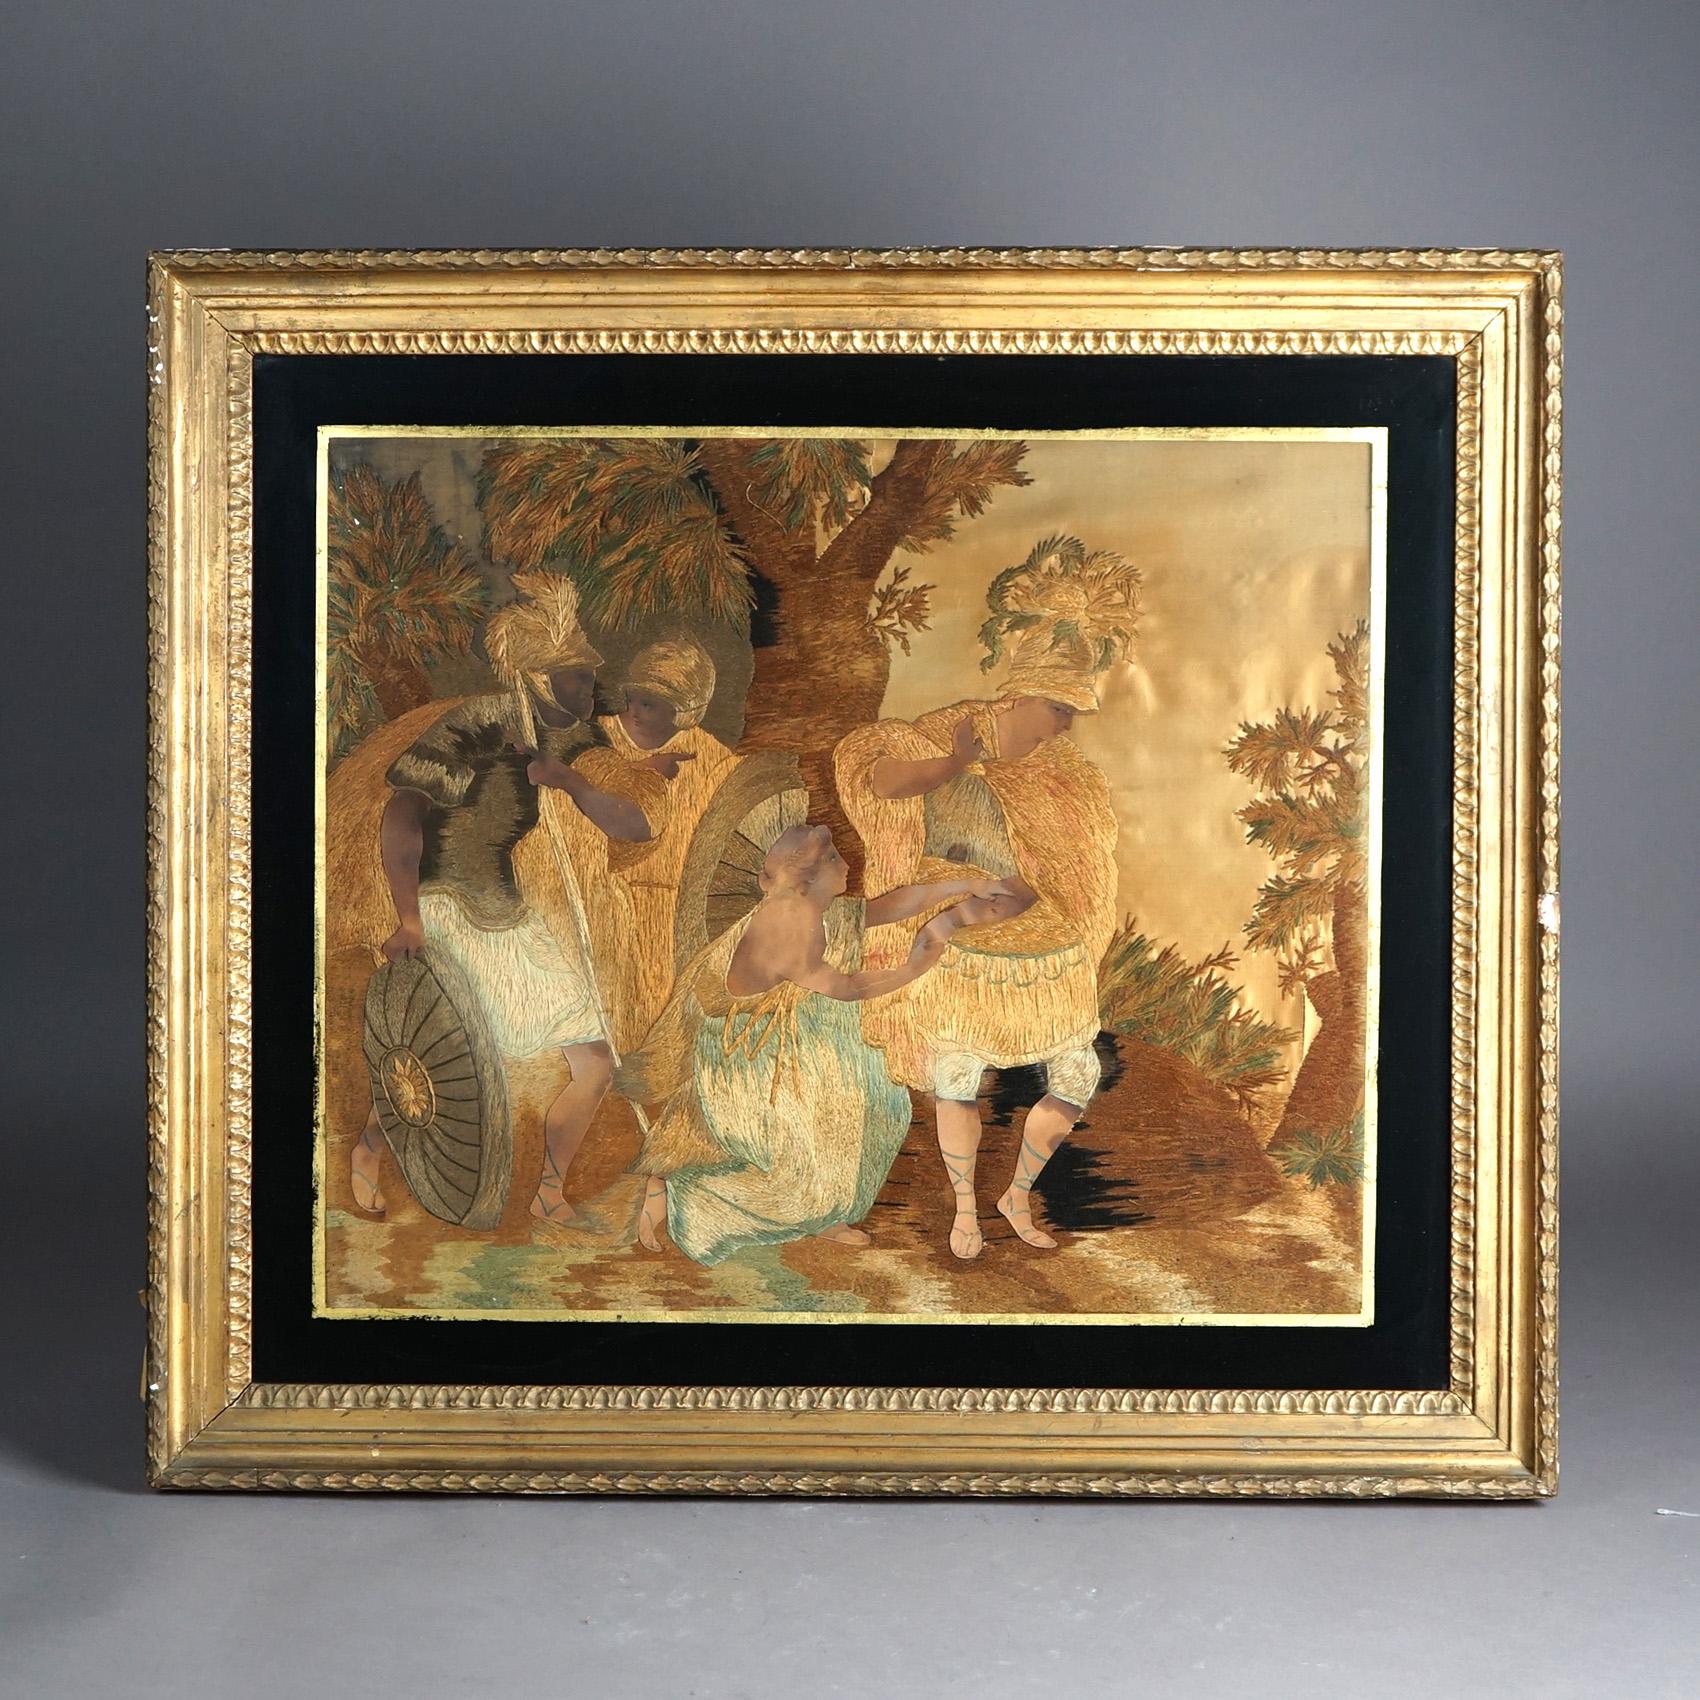 Antique collage offers Roman Greco scene in mixed media including paper and woven grasses depicting countryside scene with soldiers and chariot, framed, 19th century

Measures - 25